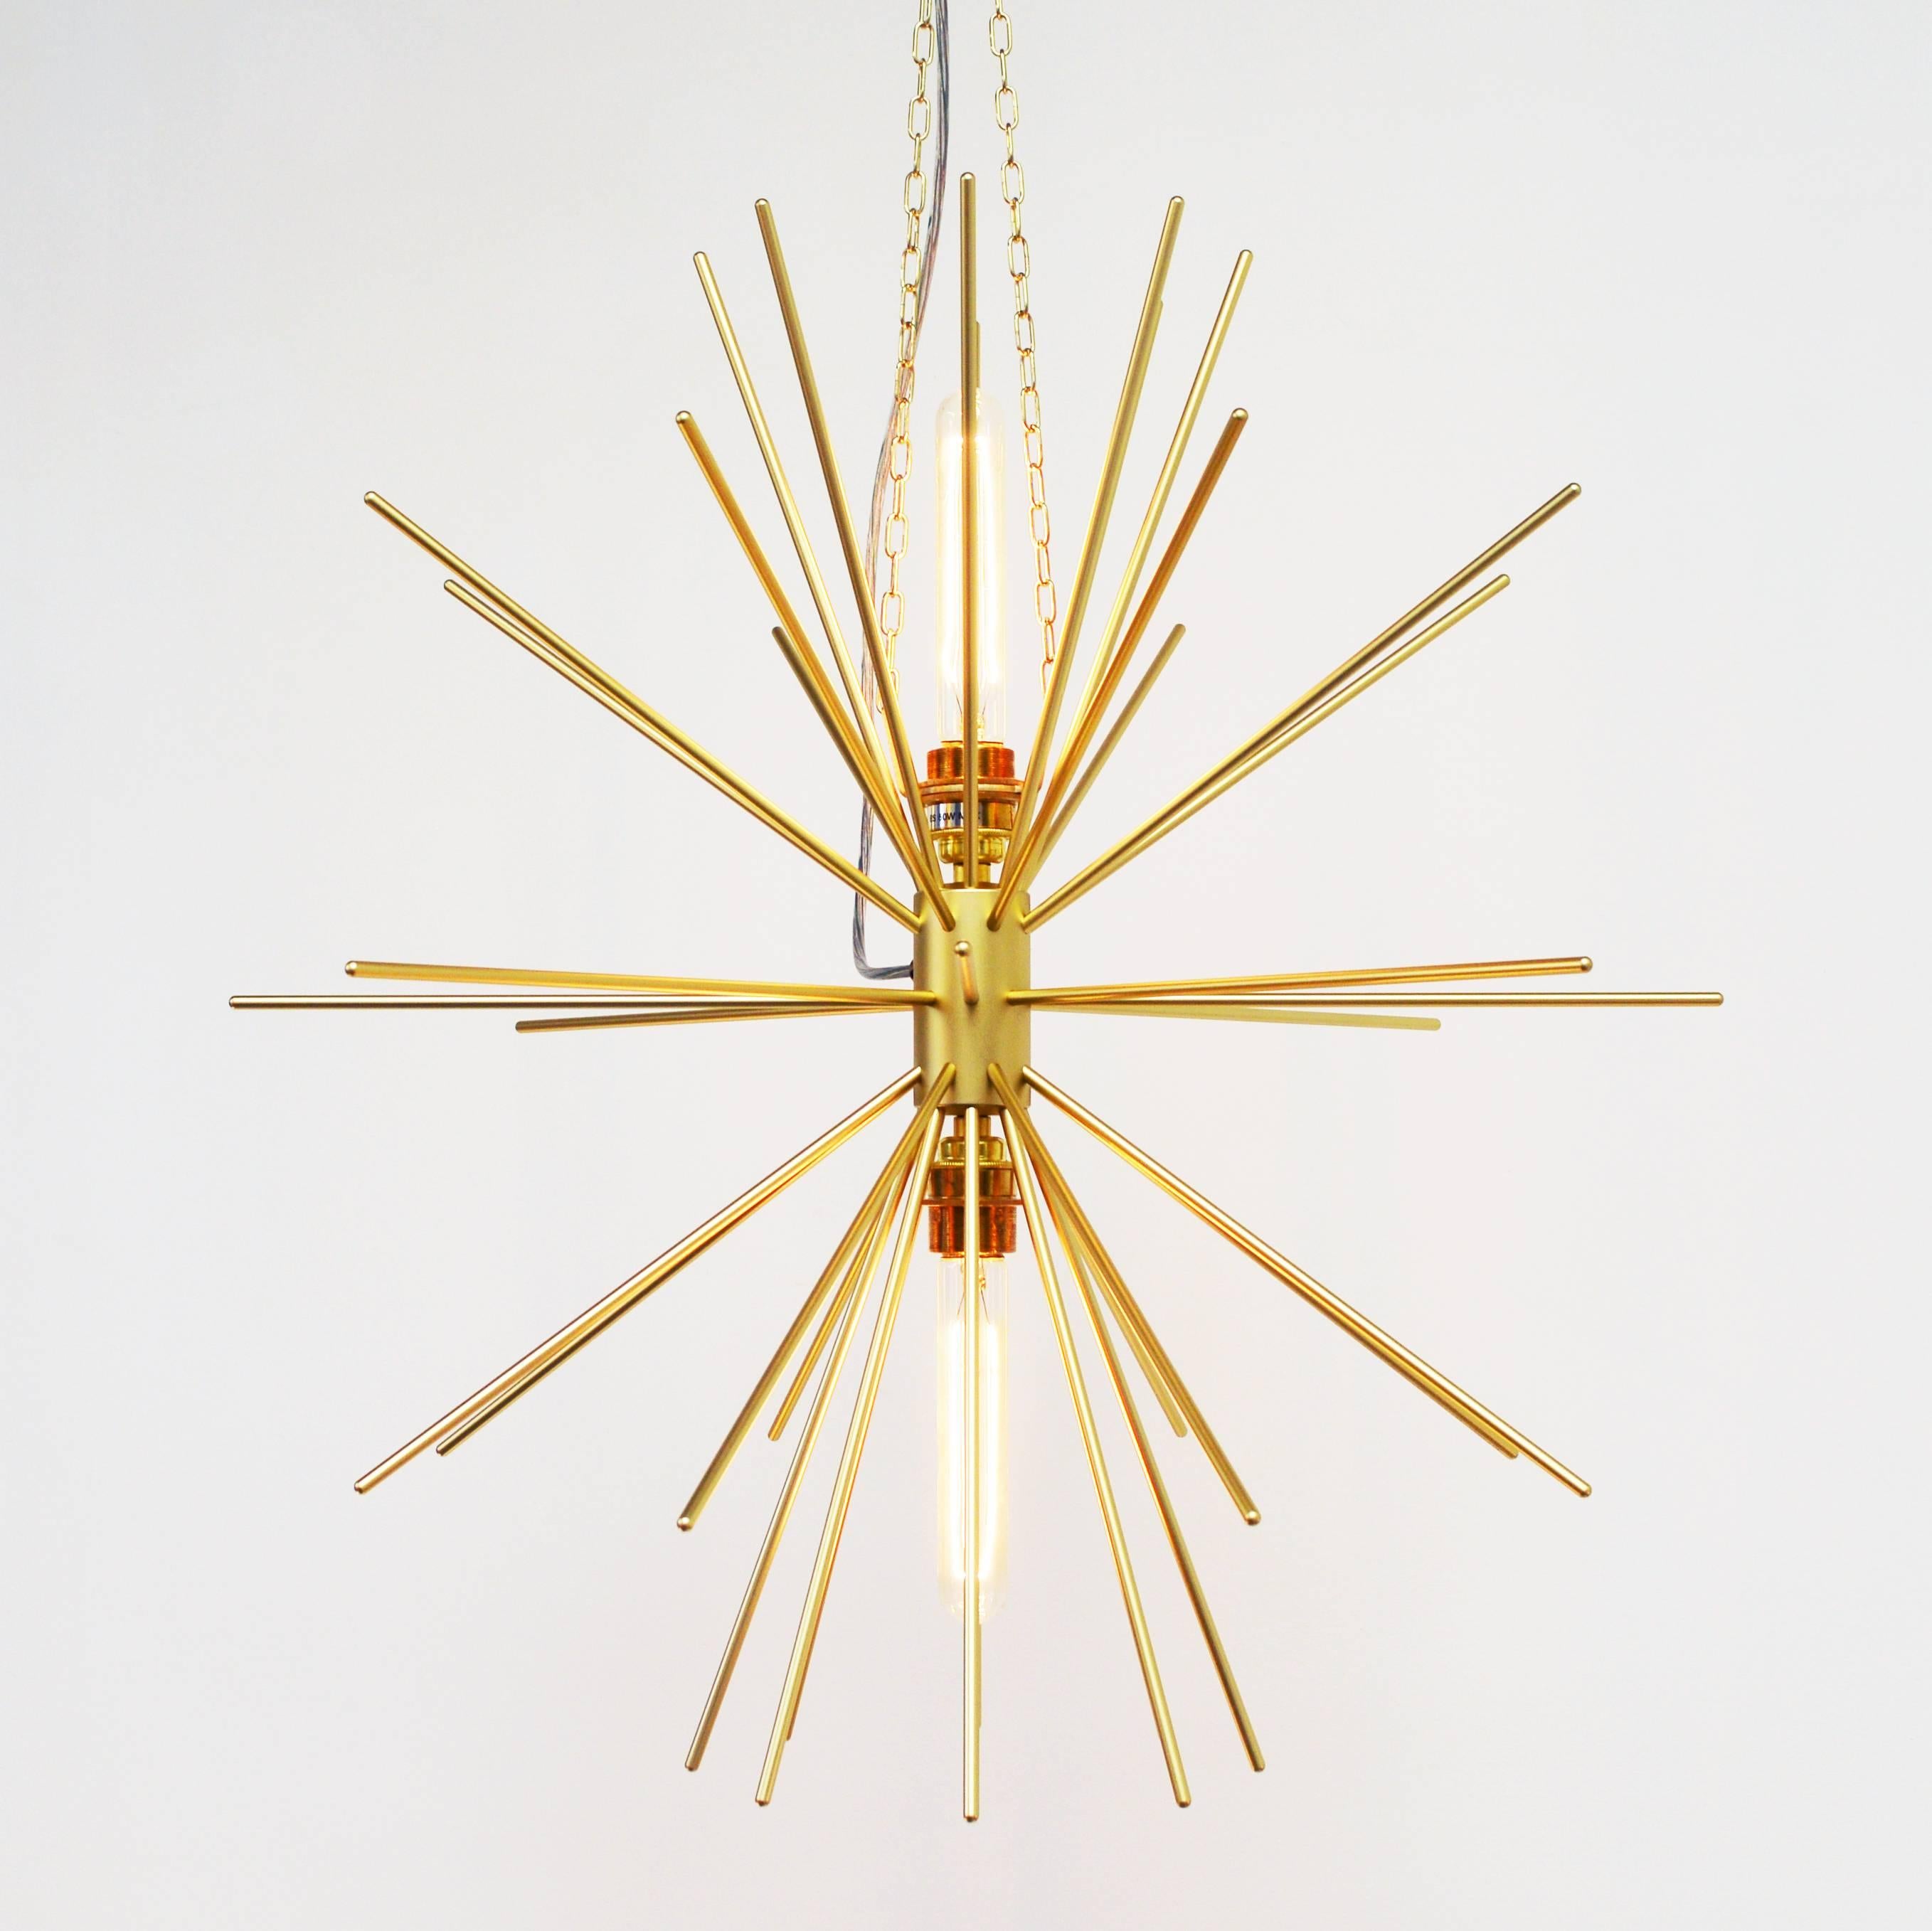 Elara is an iconic pendant light. Its 40 arms are screwed into a central body which also houses two rod filament bulbs positioned at 180 degrees. The result is a timeless and compelling golden star of light. Elara is available in anodised aluminium